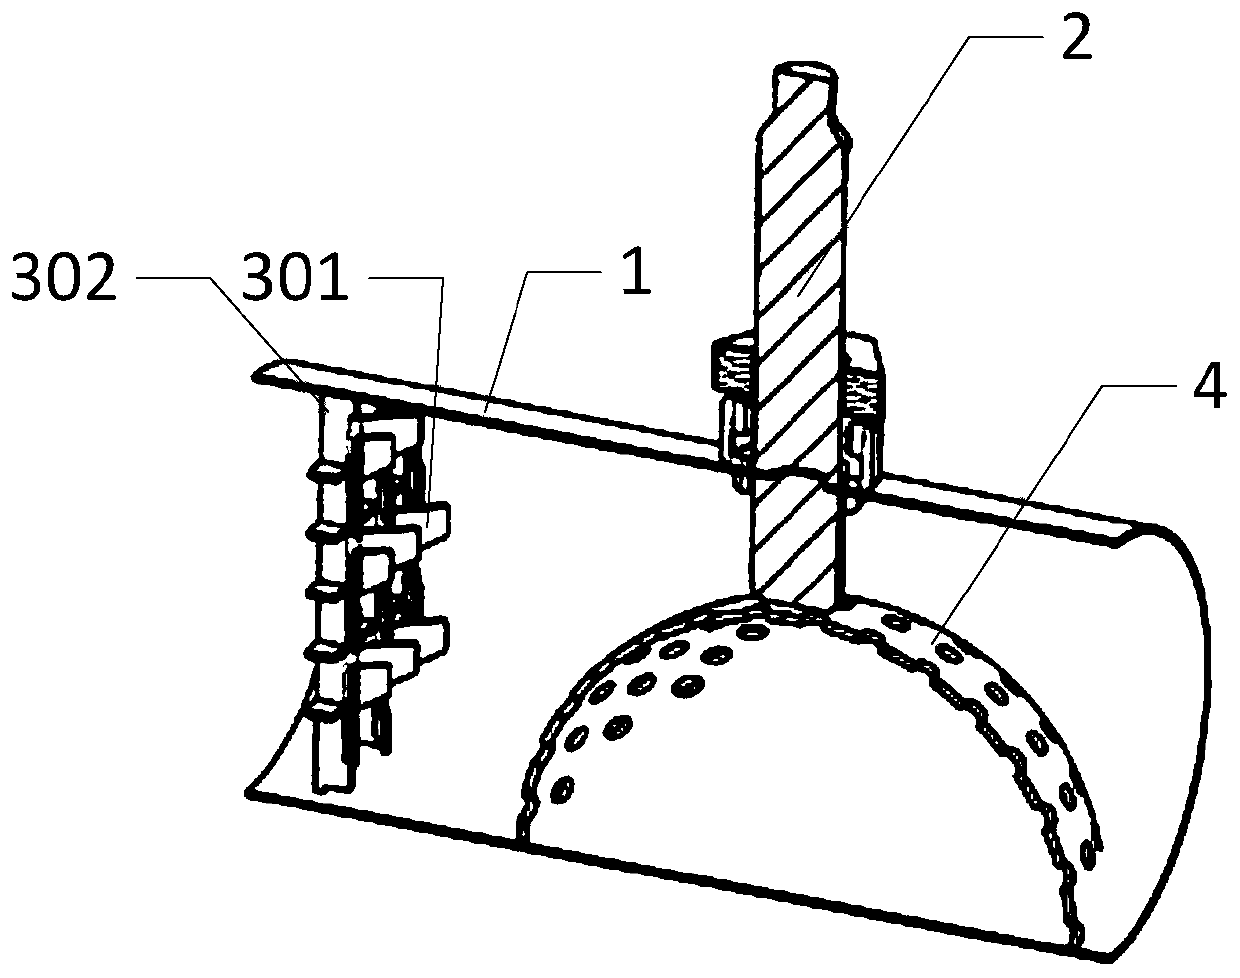 Exhaust mixing device and engine